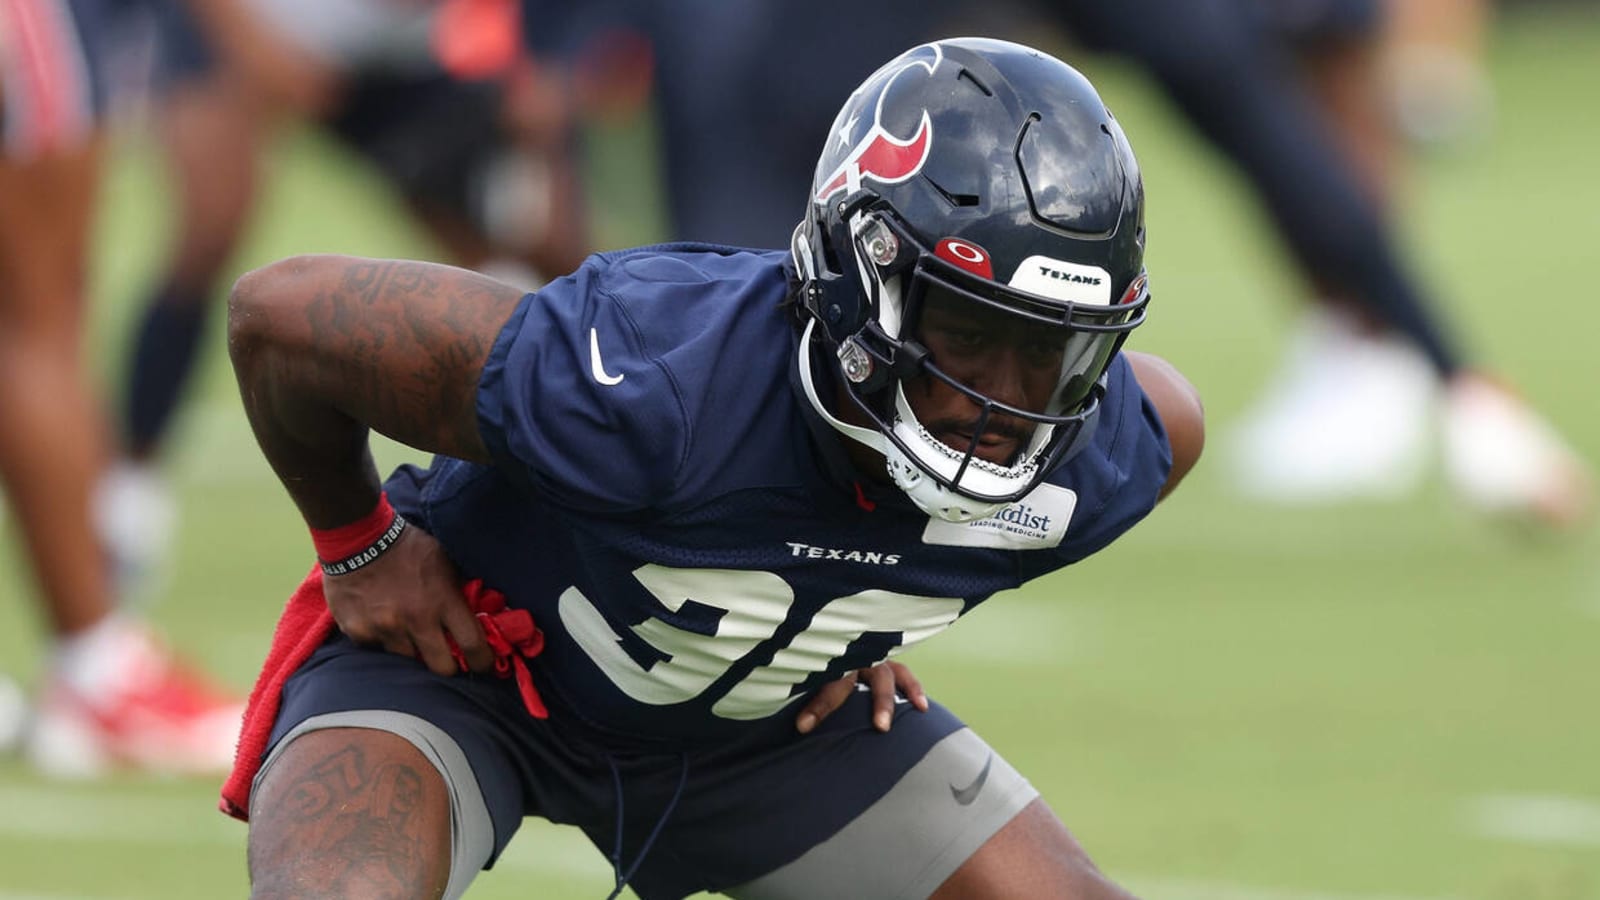 Burglary charge dropped against Texans RB Darius Anderson